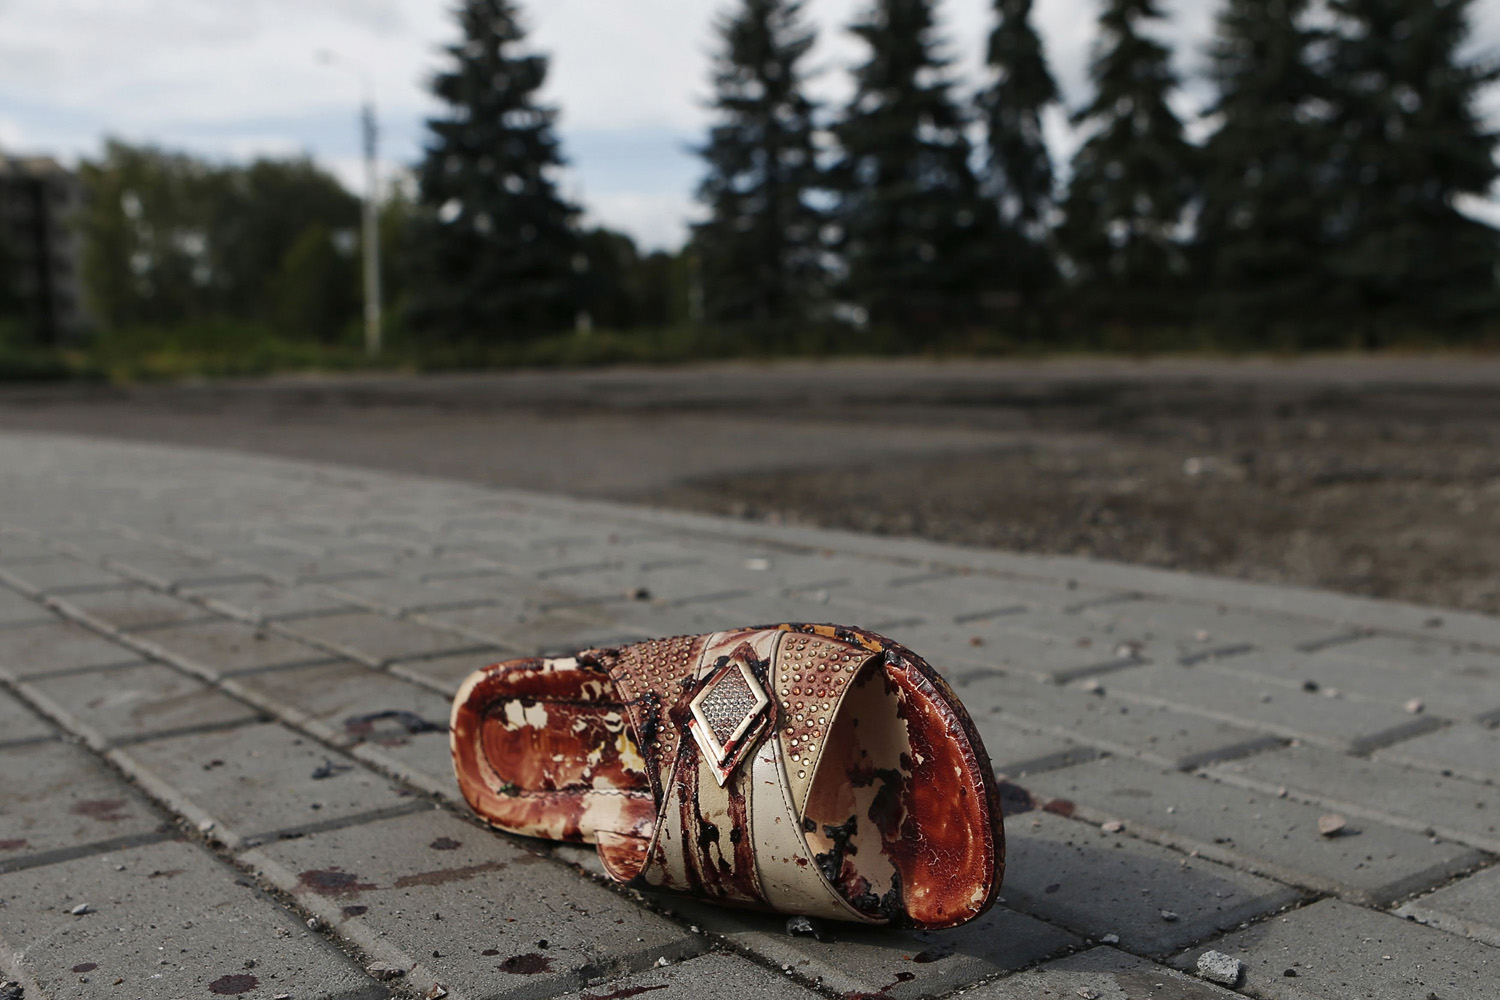 A slipper lies near bloodstains on street after recent shelling in settlement of Makiivka, on outskirts of Donetsk